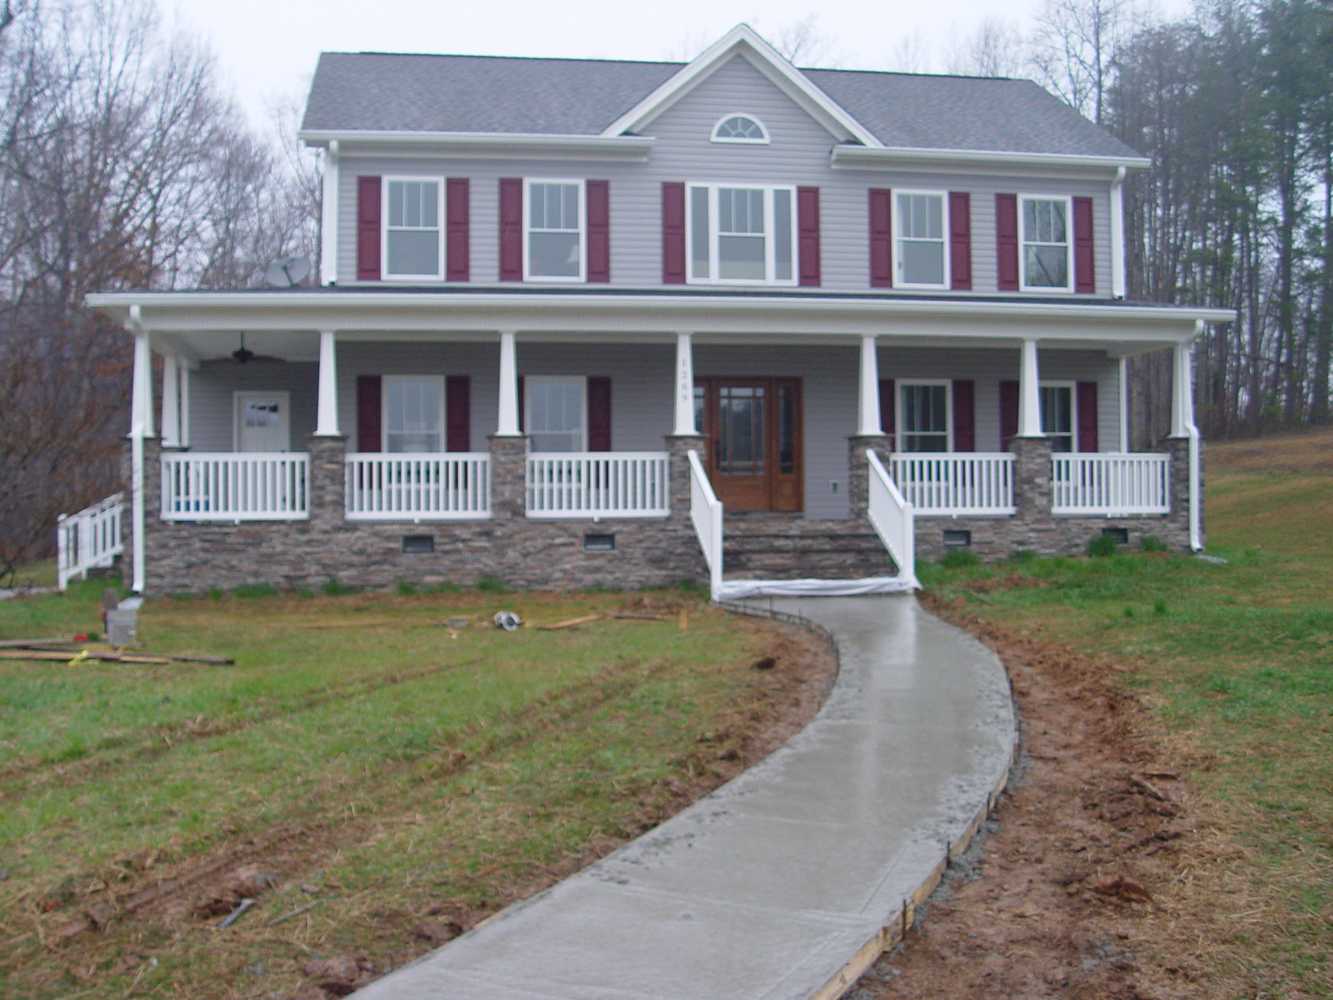 Turn of the century home demolished and new custom home built